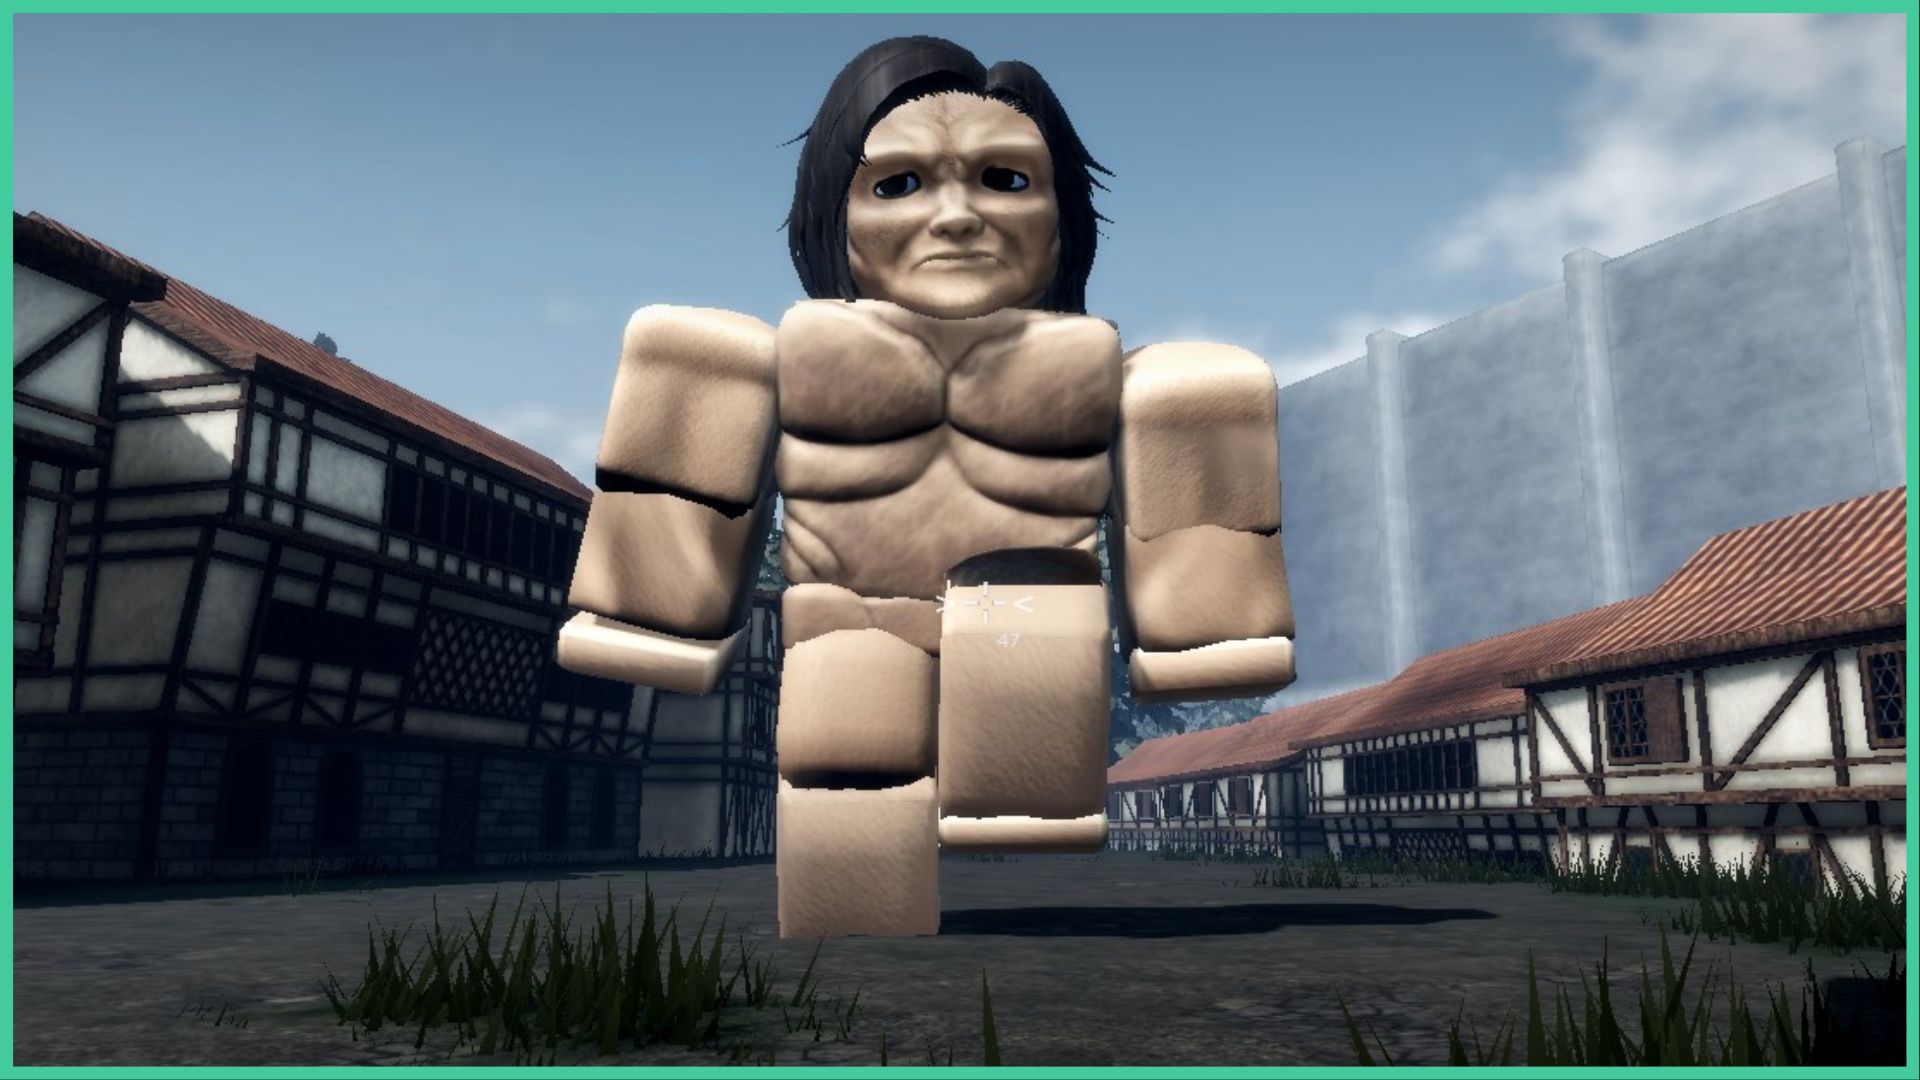 feature image for our attack on titan revolution titan shifting guide, the image features a screenshot of a titan from the game as it towers of the town walking toward the player, it is much taller than all of the buildings in the town and has somehow made its way over the wall